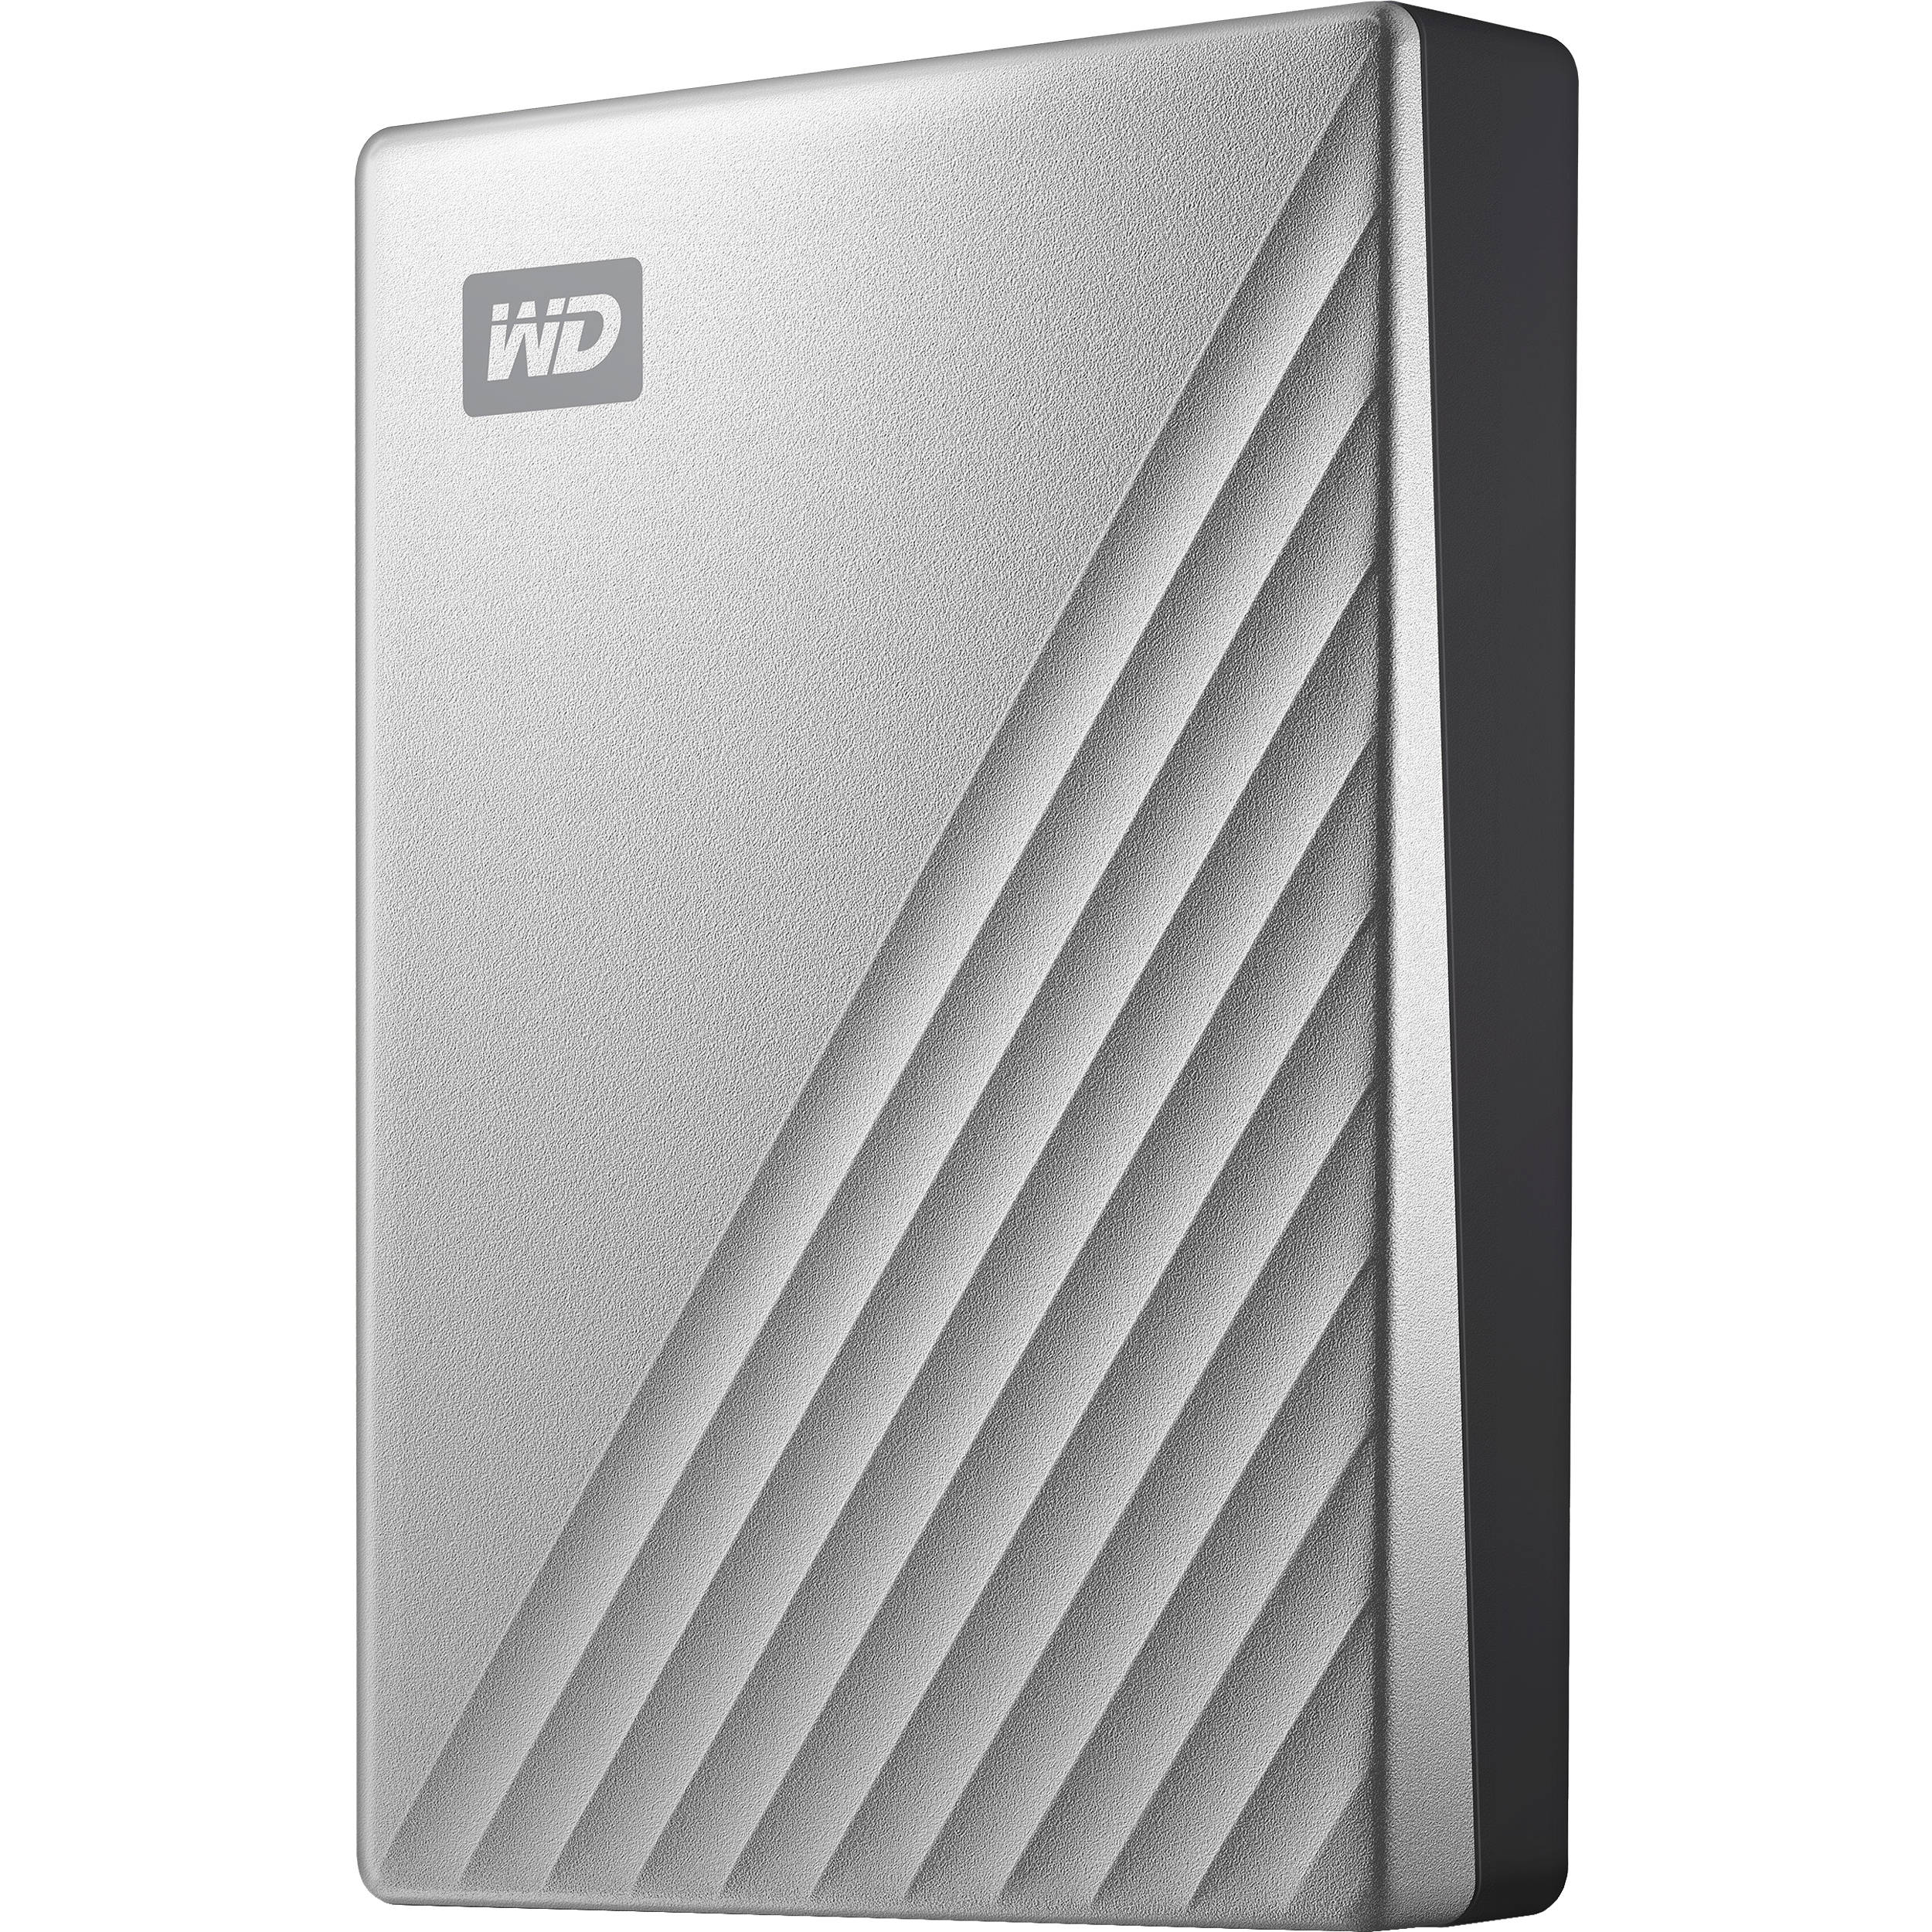 wd my passport for mac can you use for windows